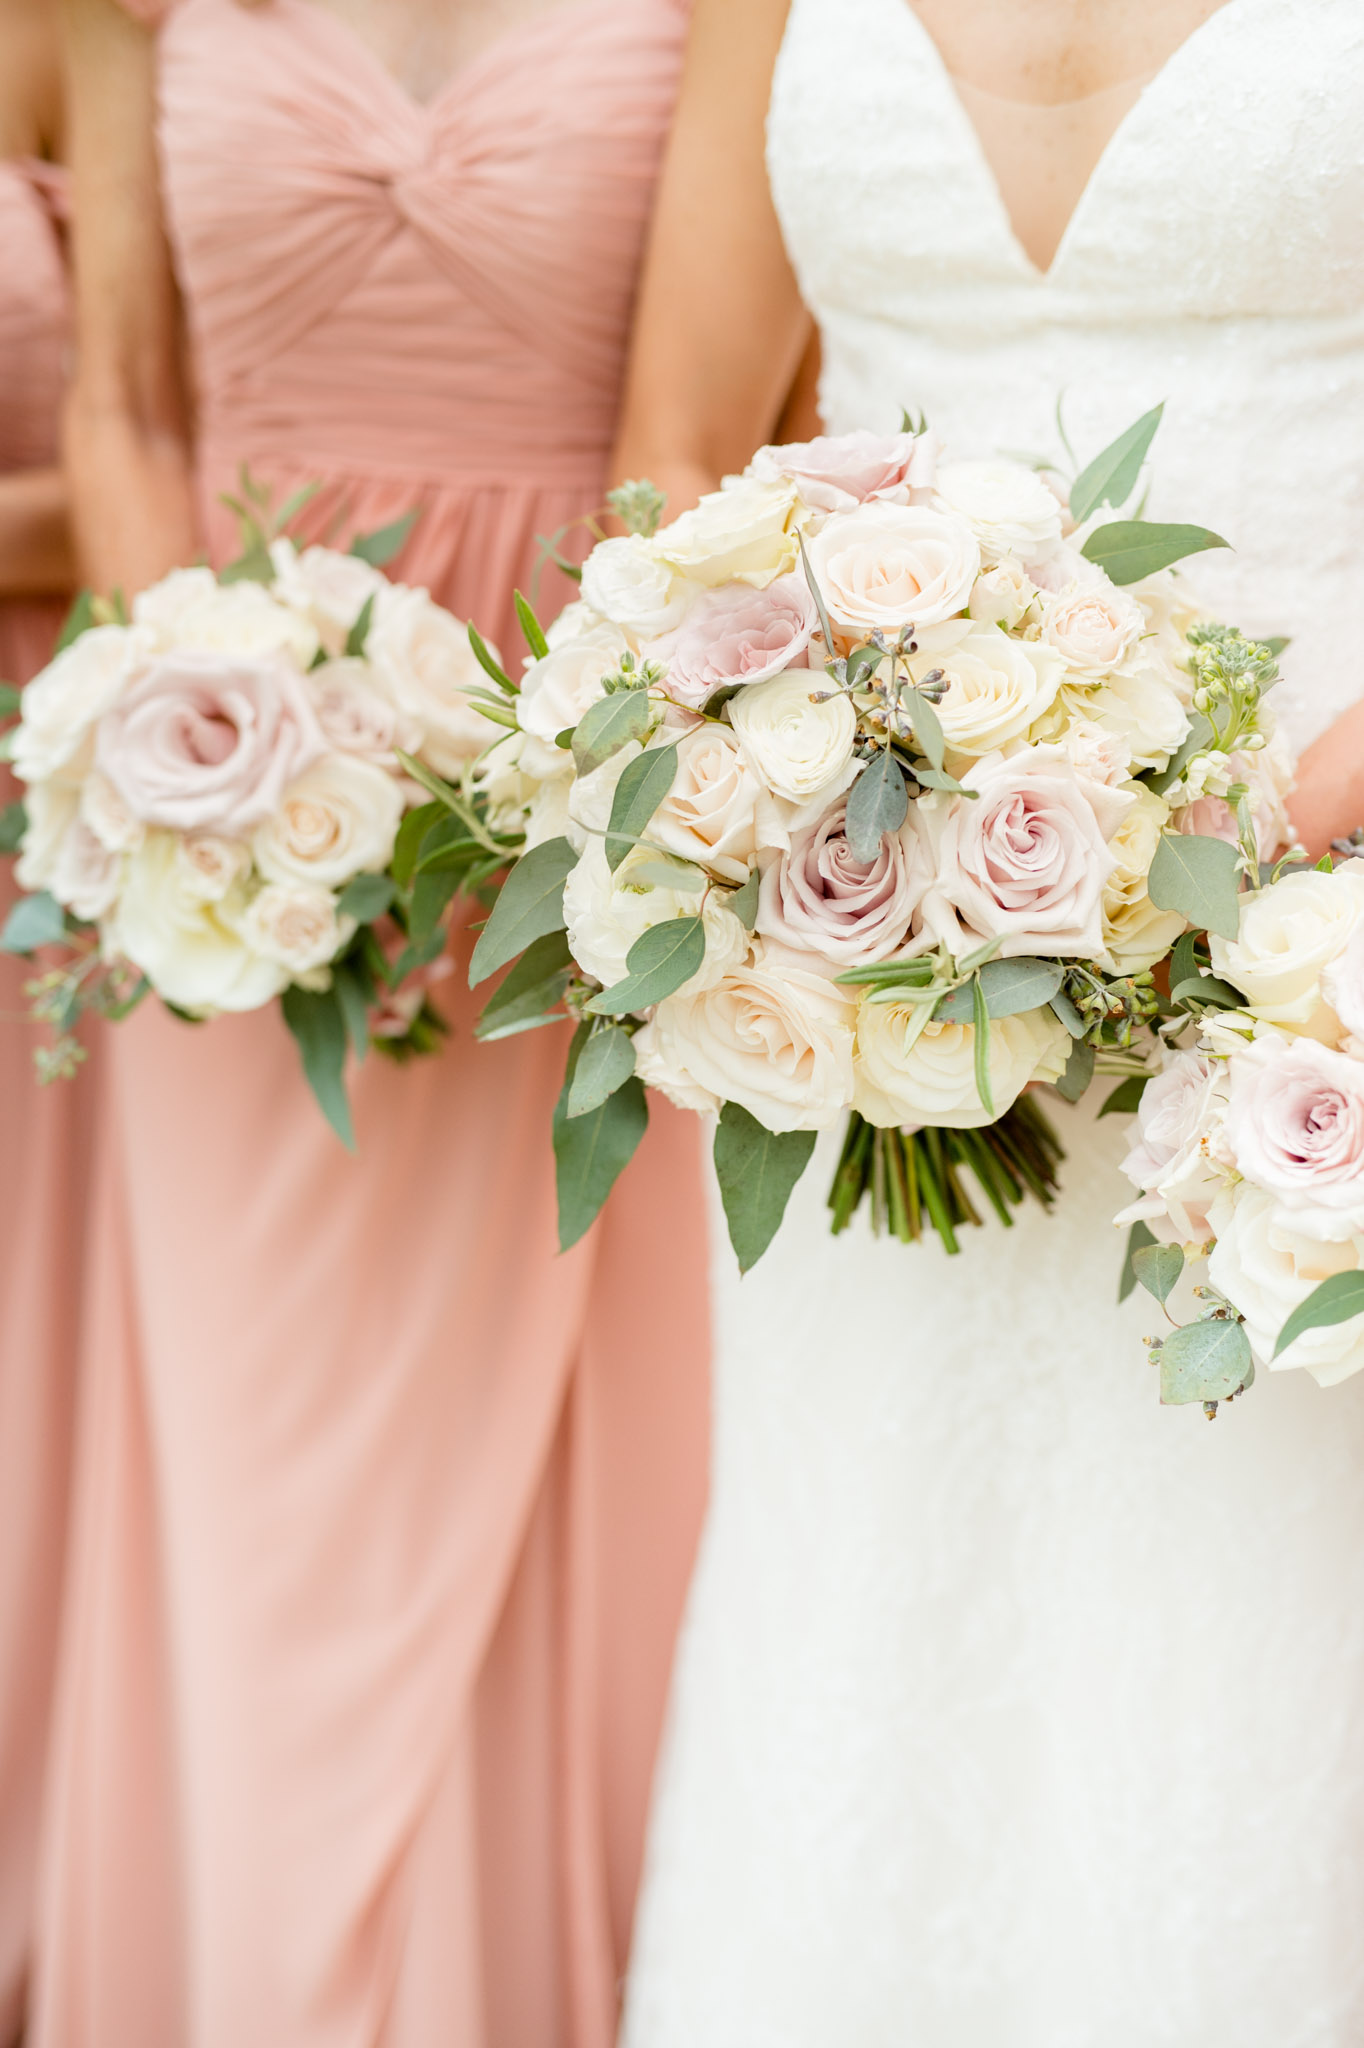 Closeup of bride and bridesmaid's flowers.